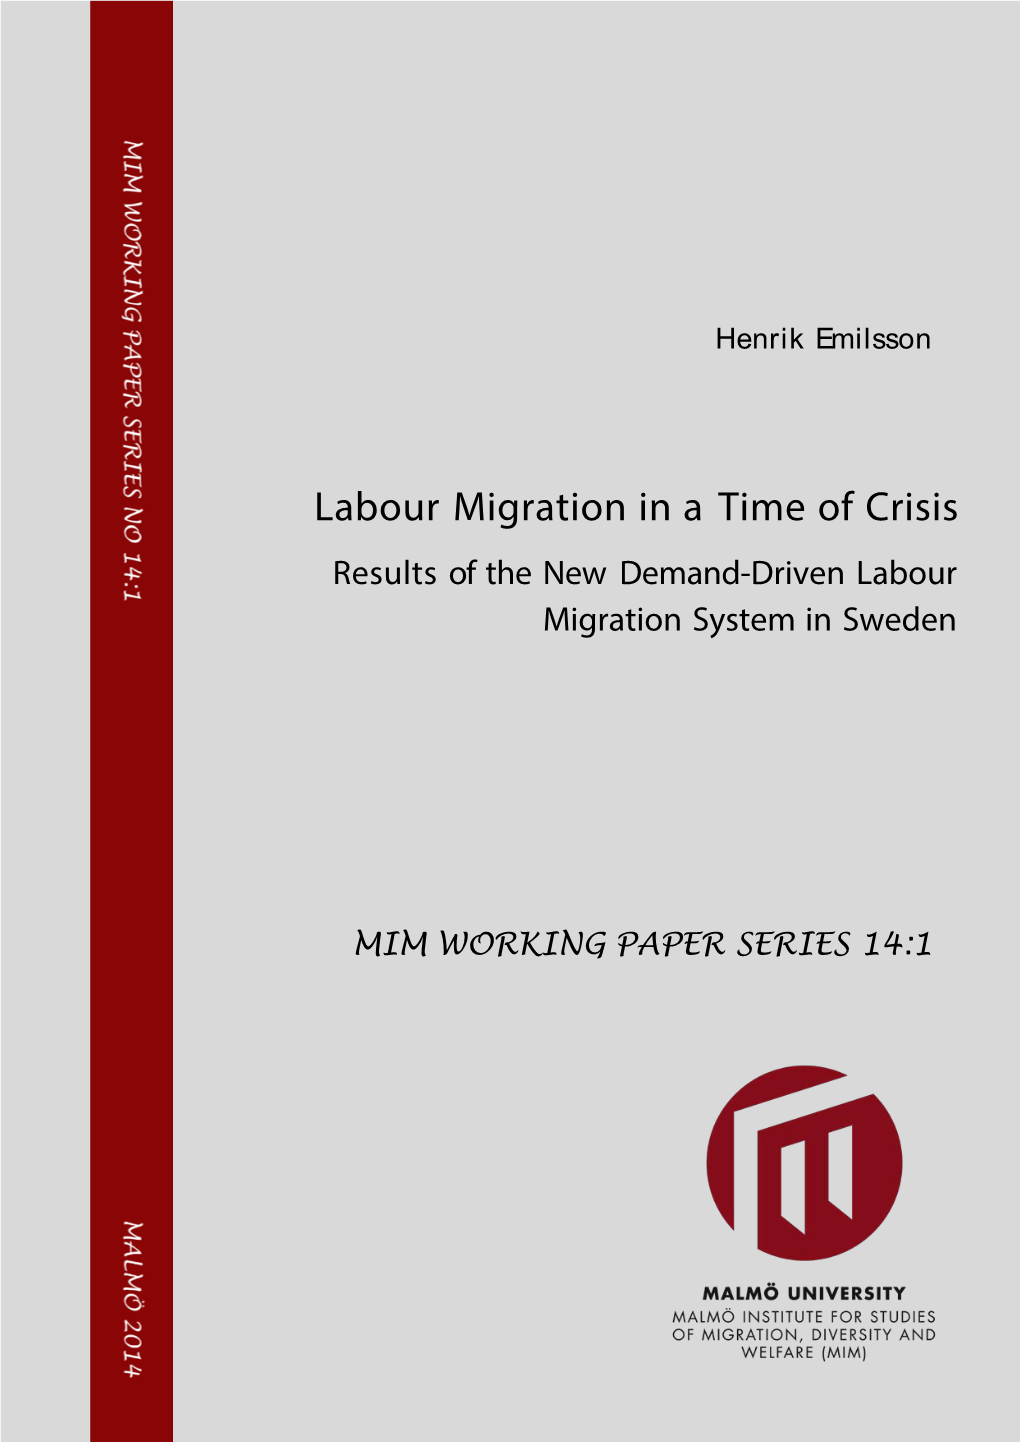 Labour Migration in a Time of Crisis Results of the New Demand-Driven Labour Migration System in Sweden